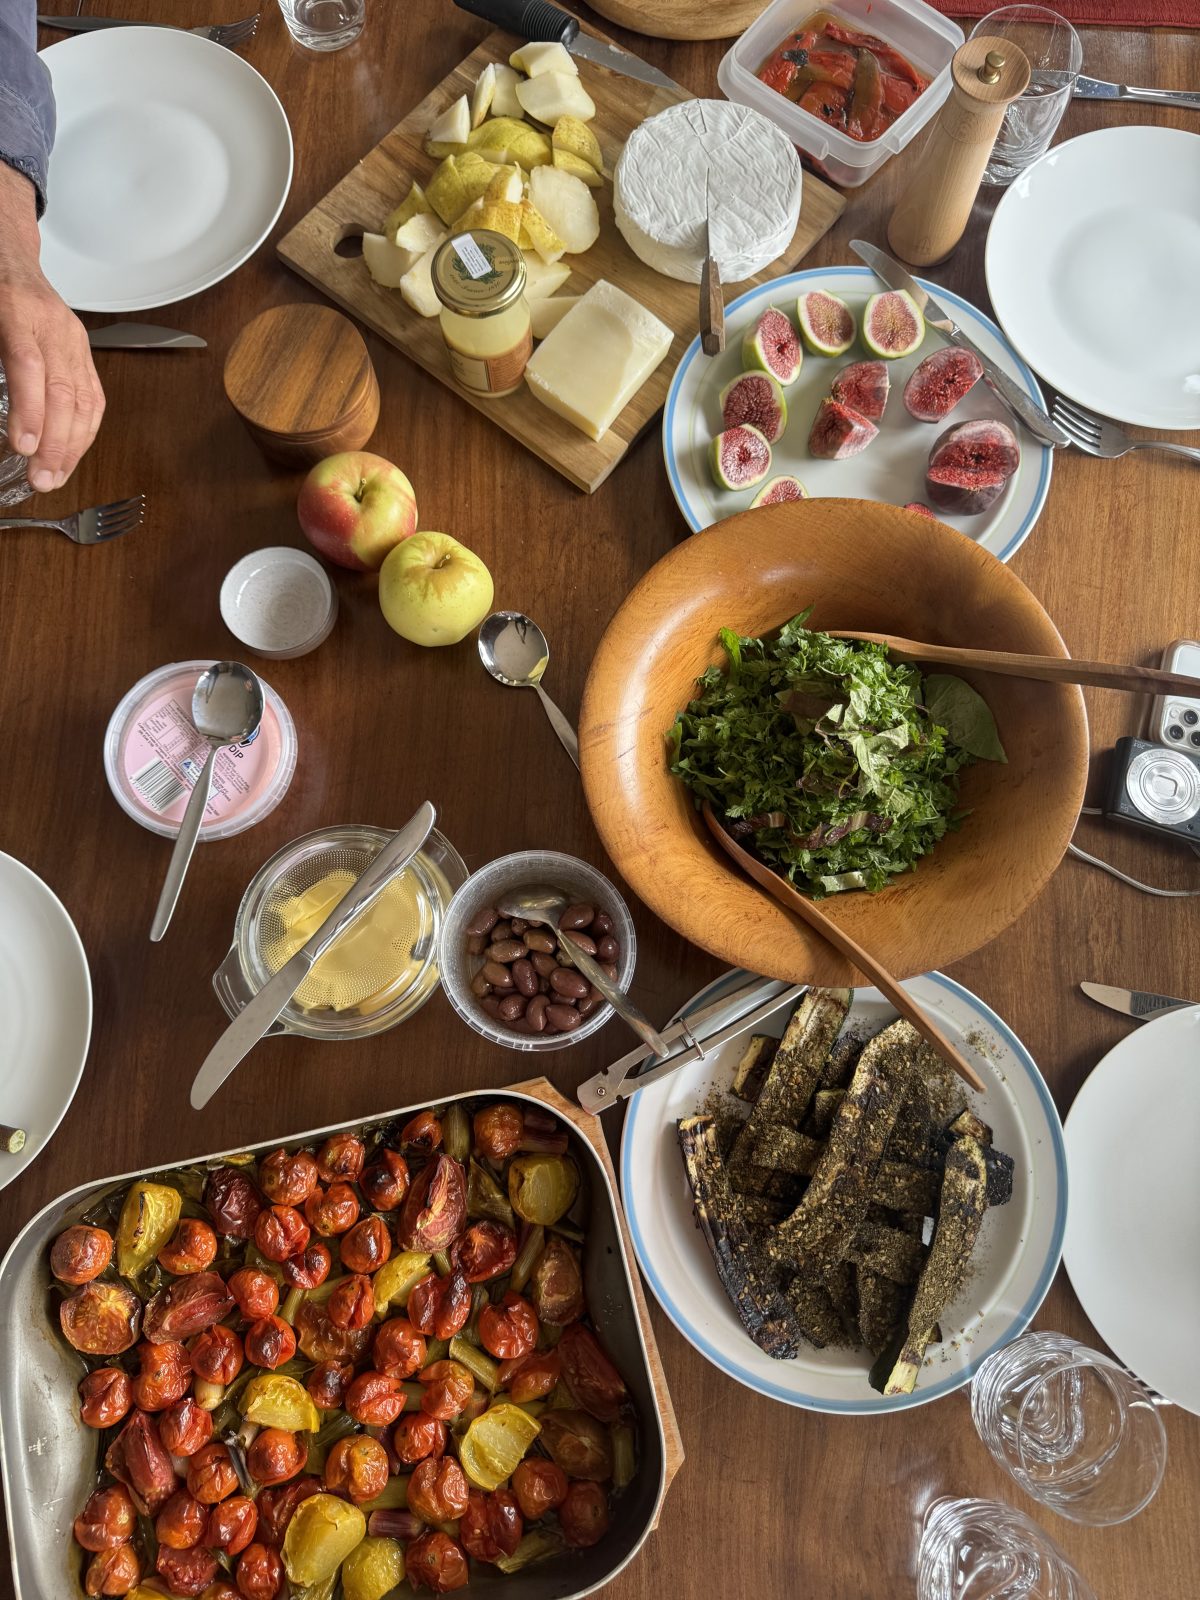 An overhead view of a table set for lunch with tomatoes, figs, zucchini and cheese.